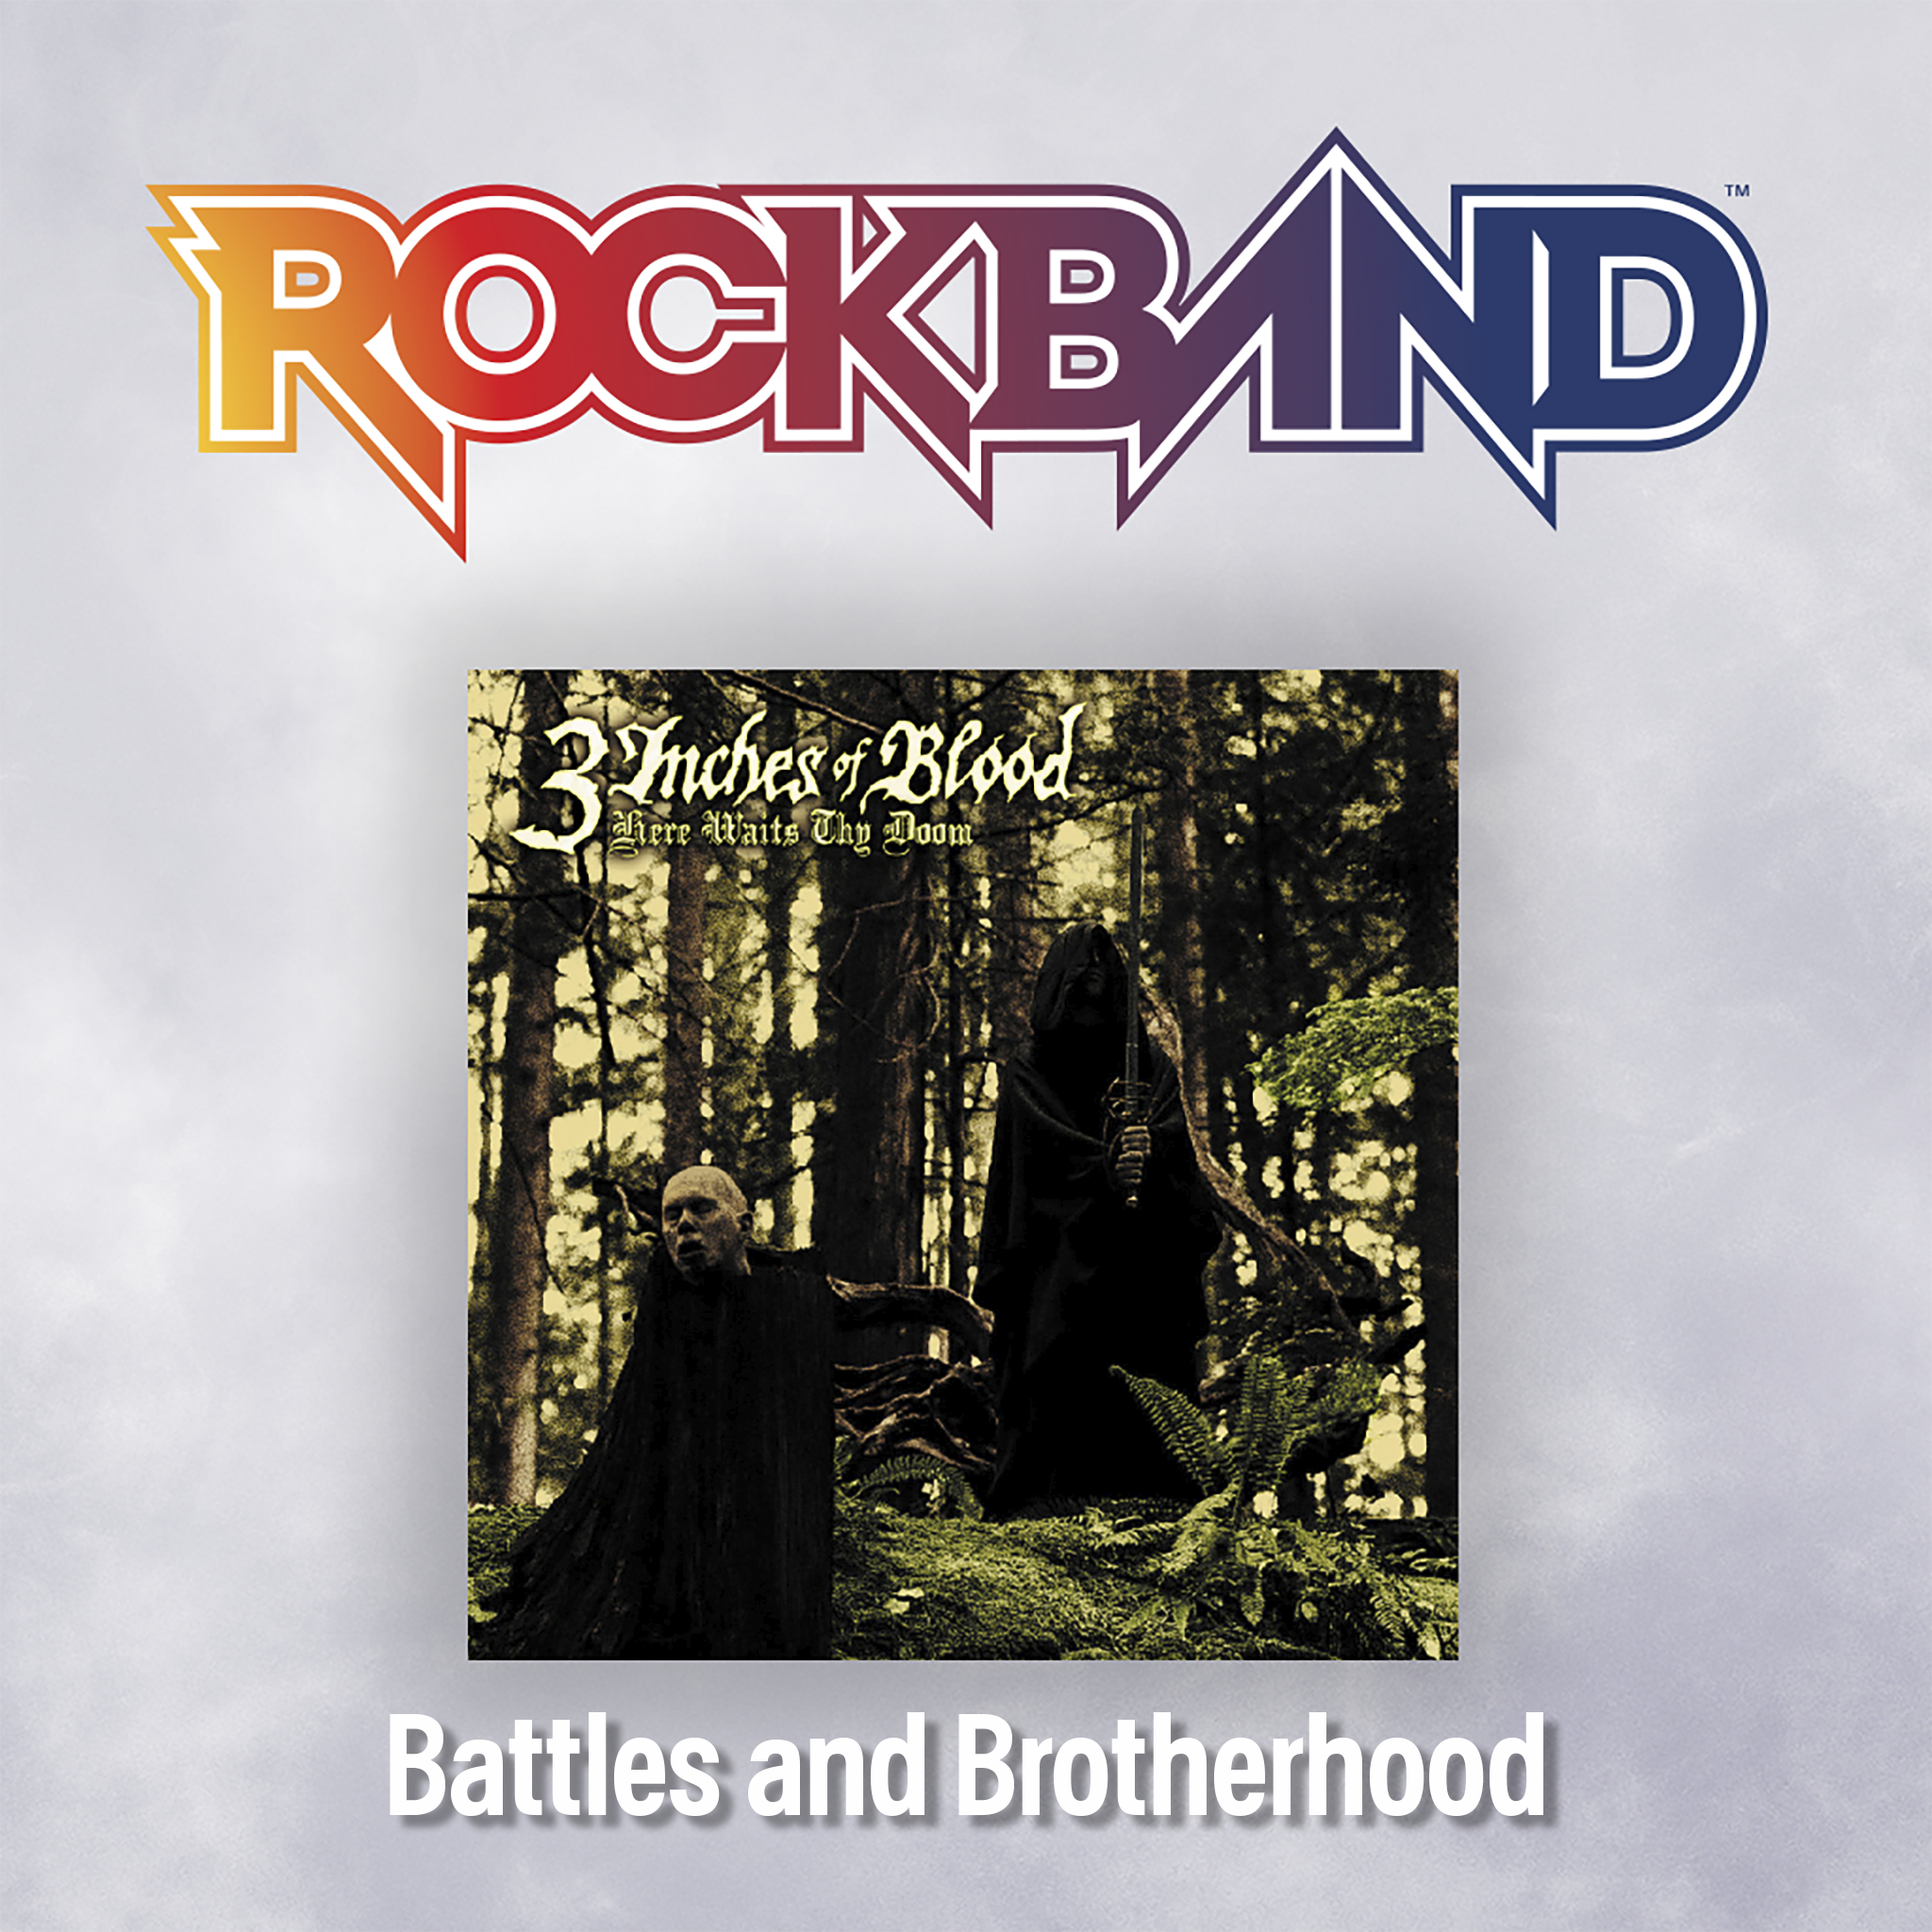 'Battles and Brotherhood' - 3 Inches of Blood